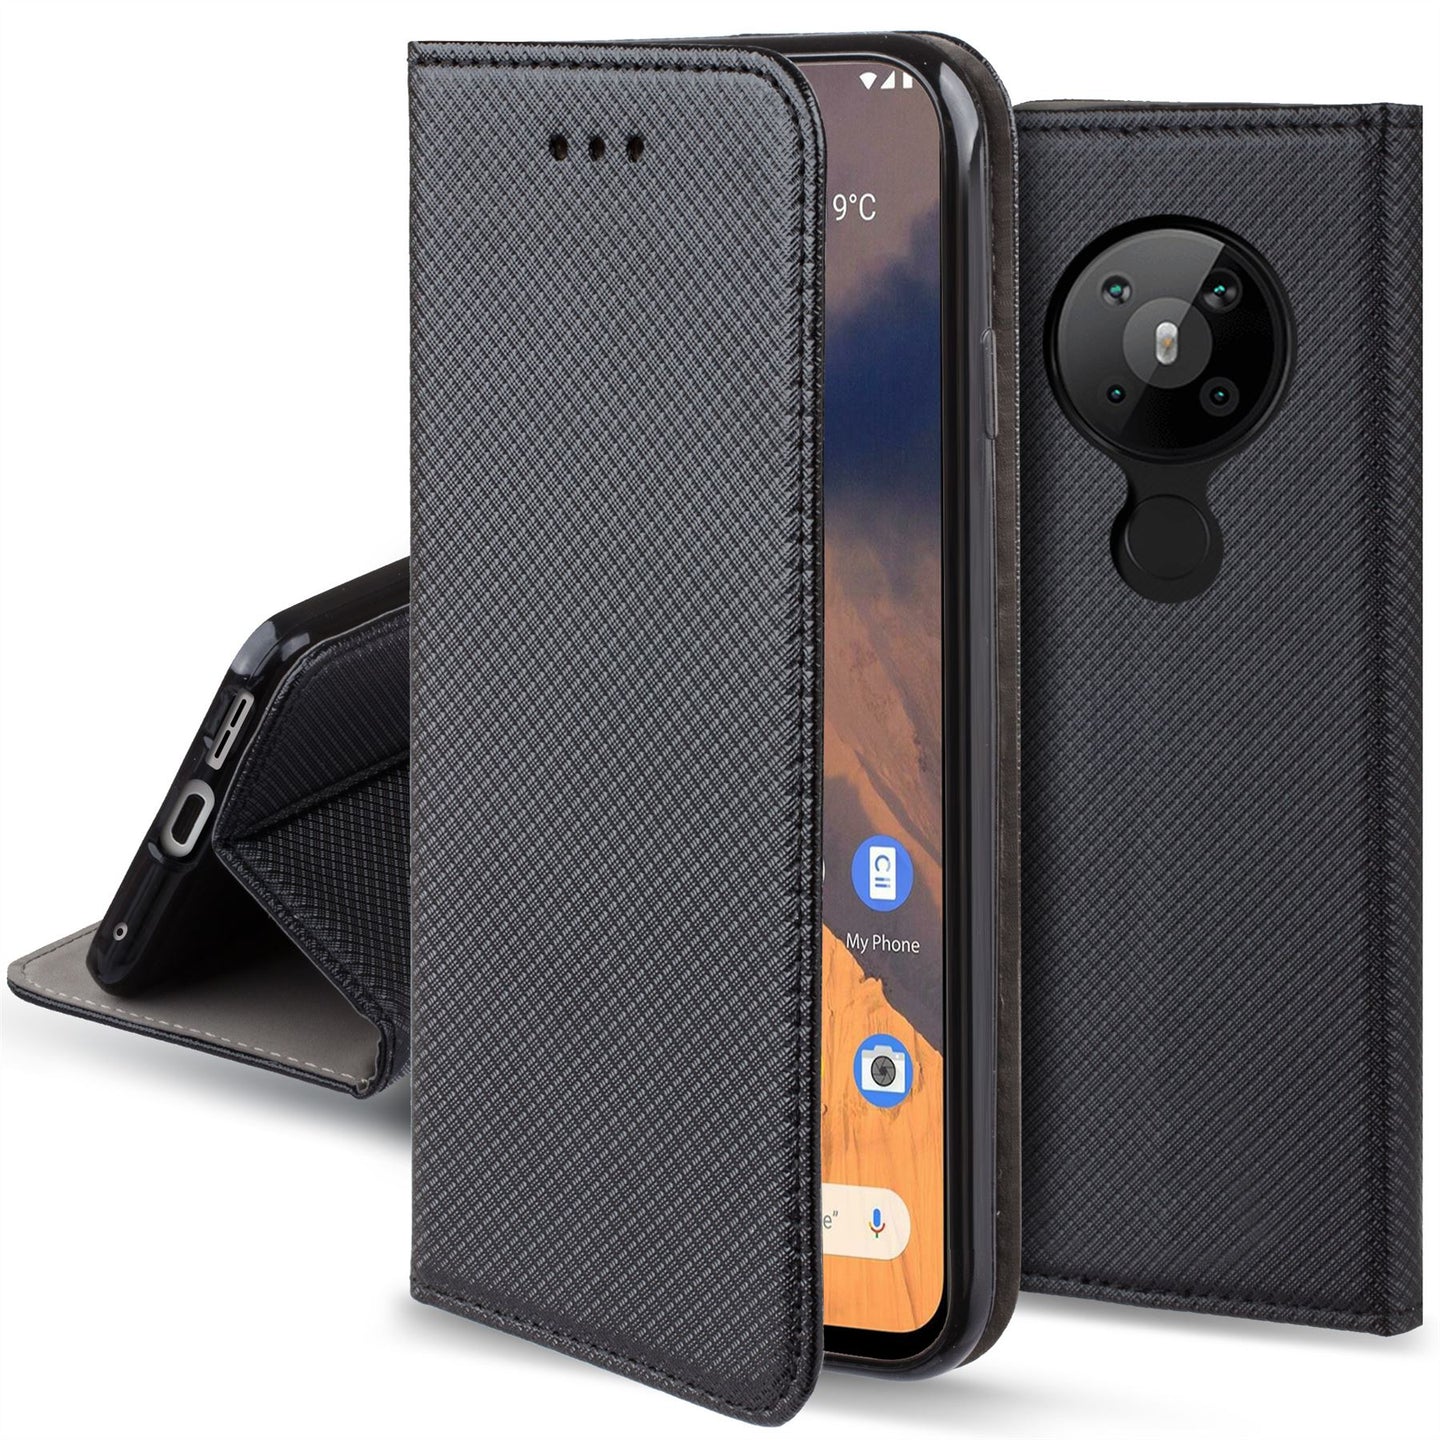 Moozy Case Flip Cover for Nokia 5.3, Black - Smart Magnetic Flip Case with Card Holder and Stand